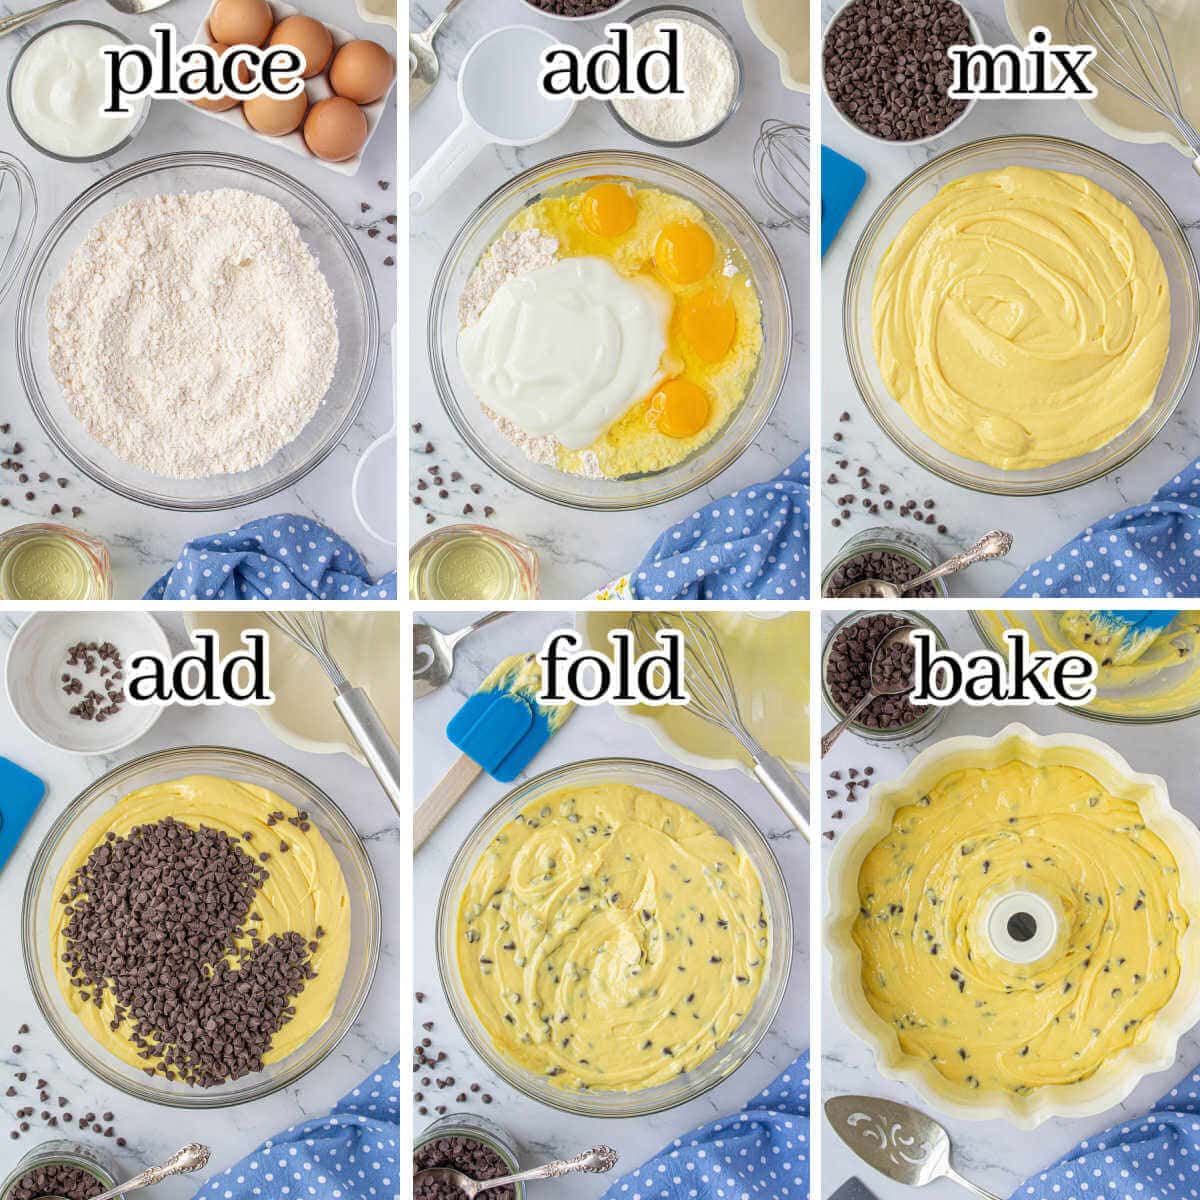 Step-by-step instructions to make the cake recipe, with print overlay.